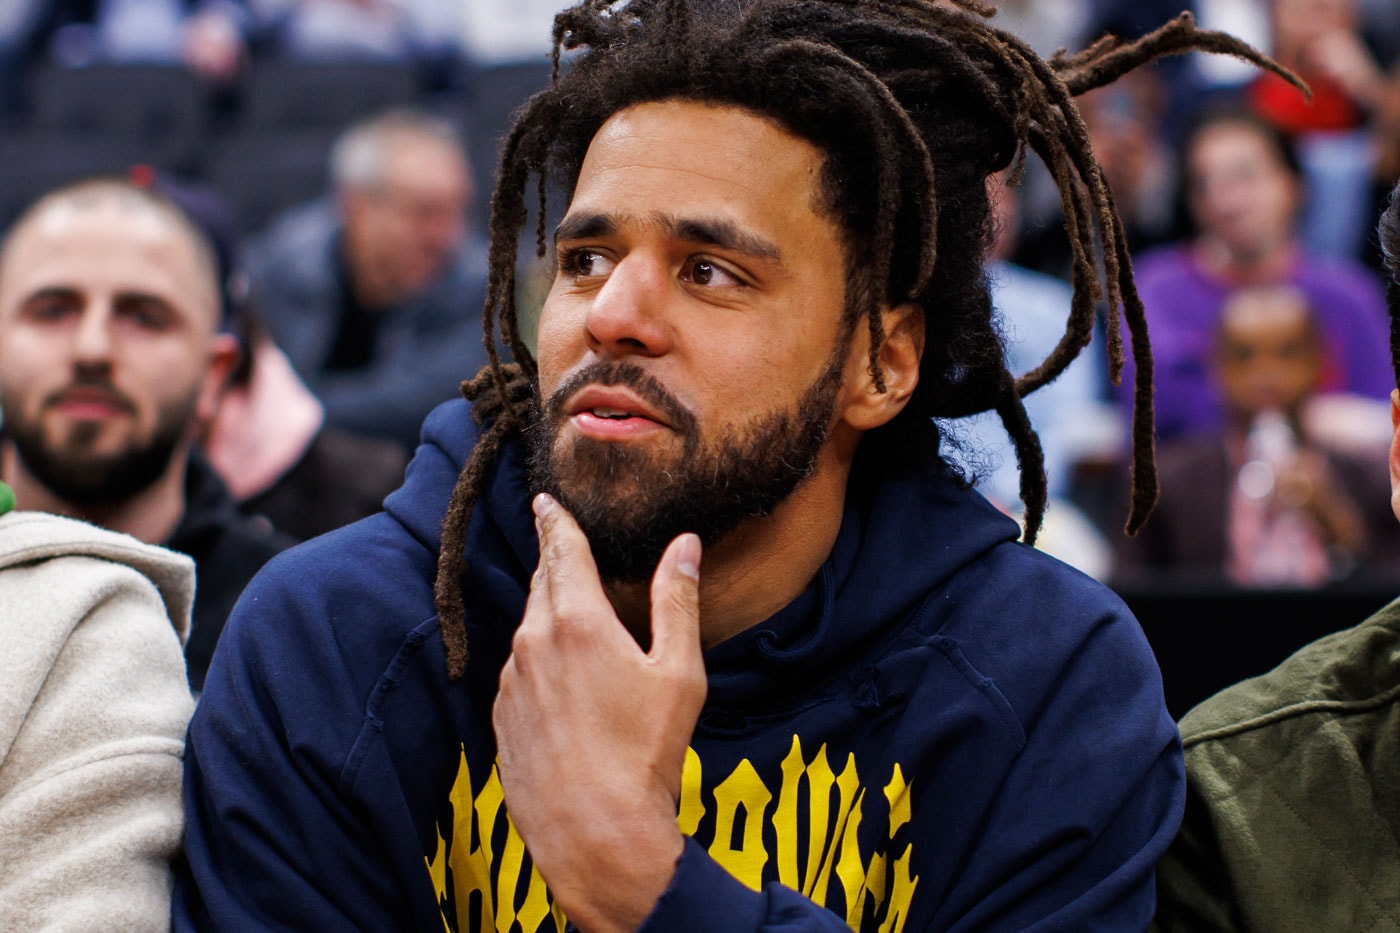 Listen to J. Cole's Newest Single "Folgers Crystals" Now